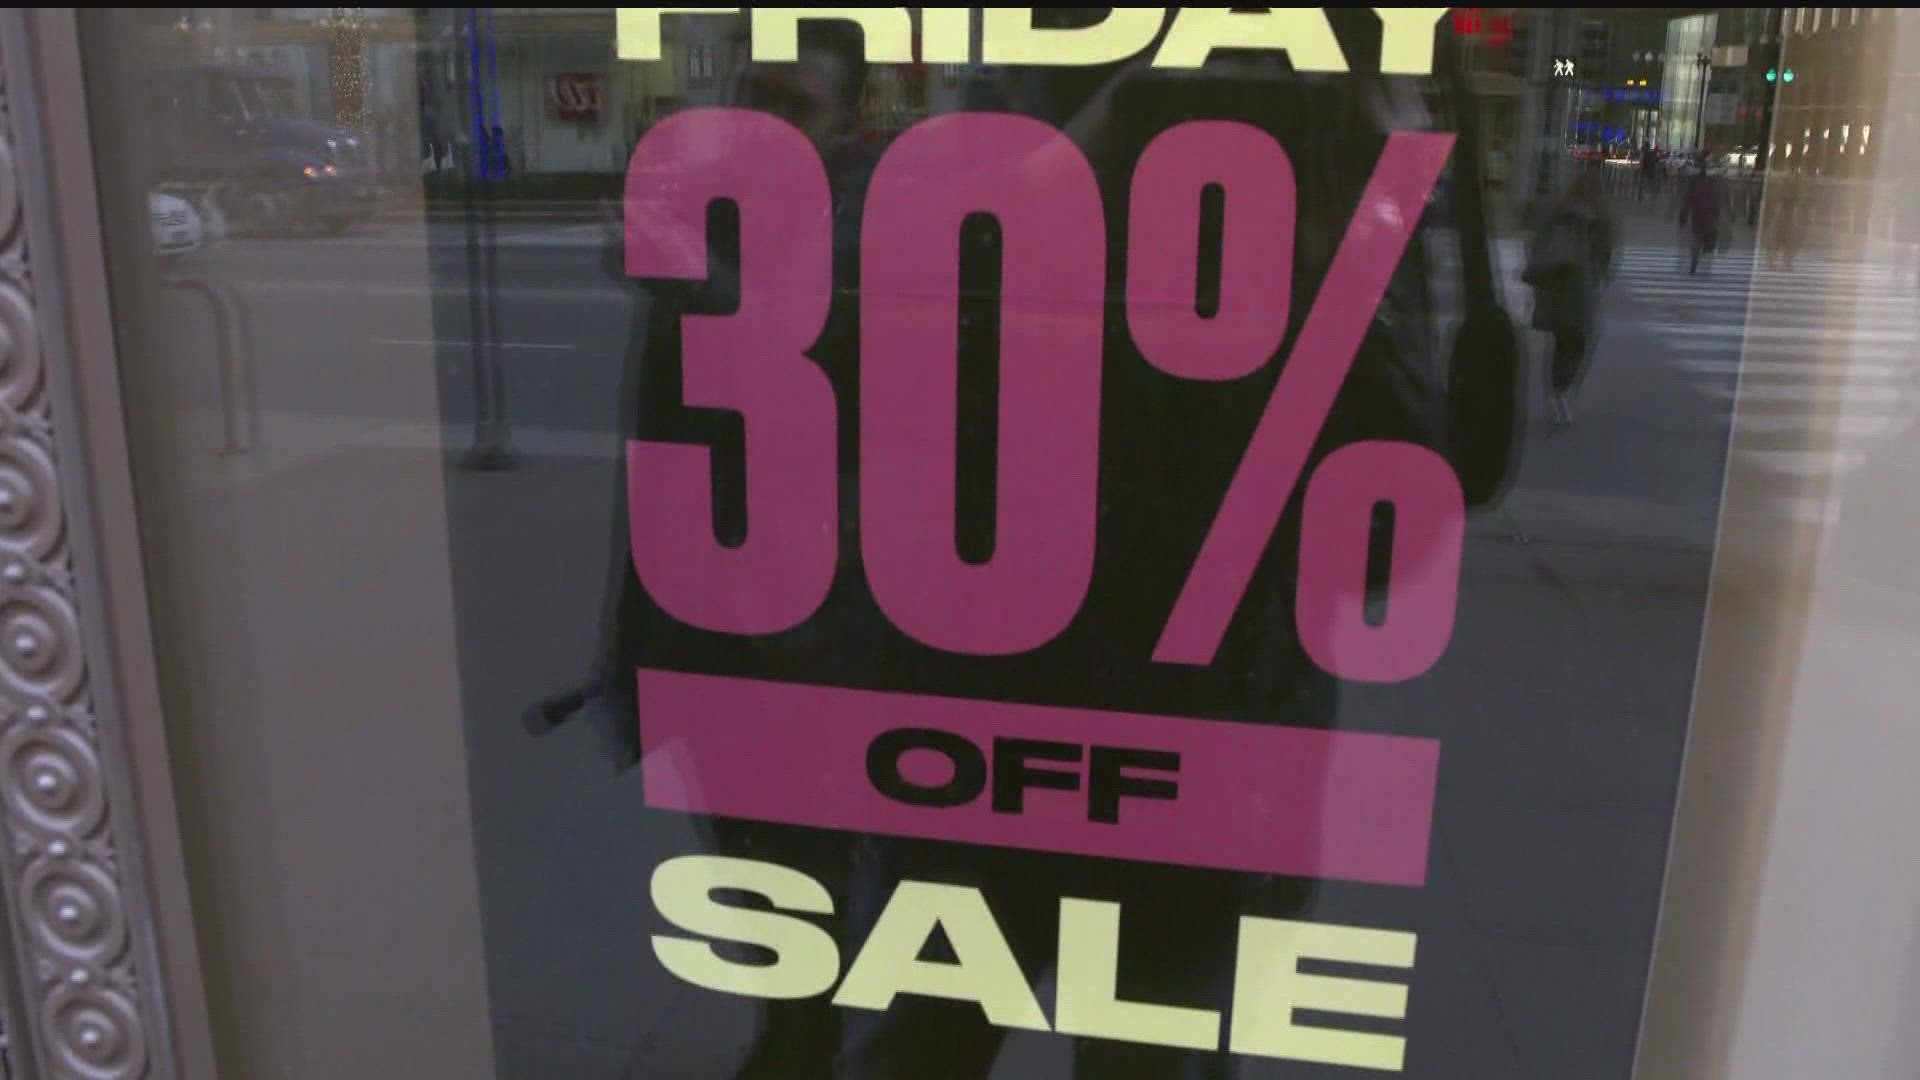 The National Retail Federation expects more than 166 million Americans will shop from Black Friday through Cyber Monday.